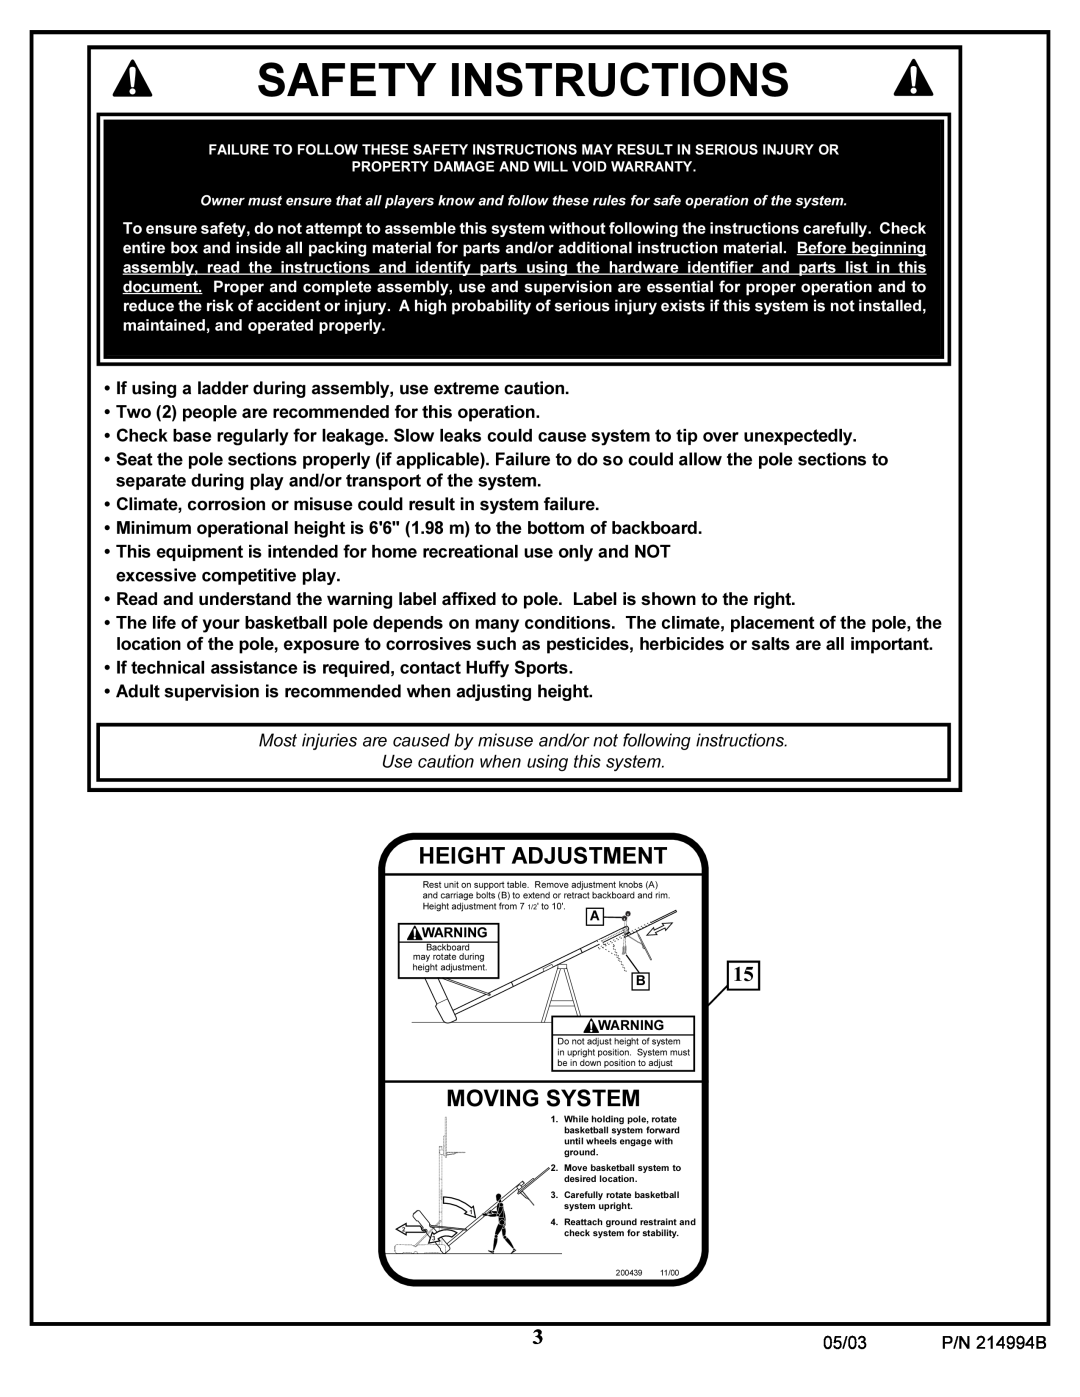 Spalding 214994B manual Safety Instructions, Height Adjustment, Moving System 